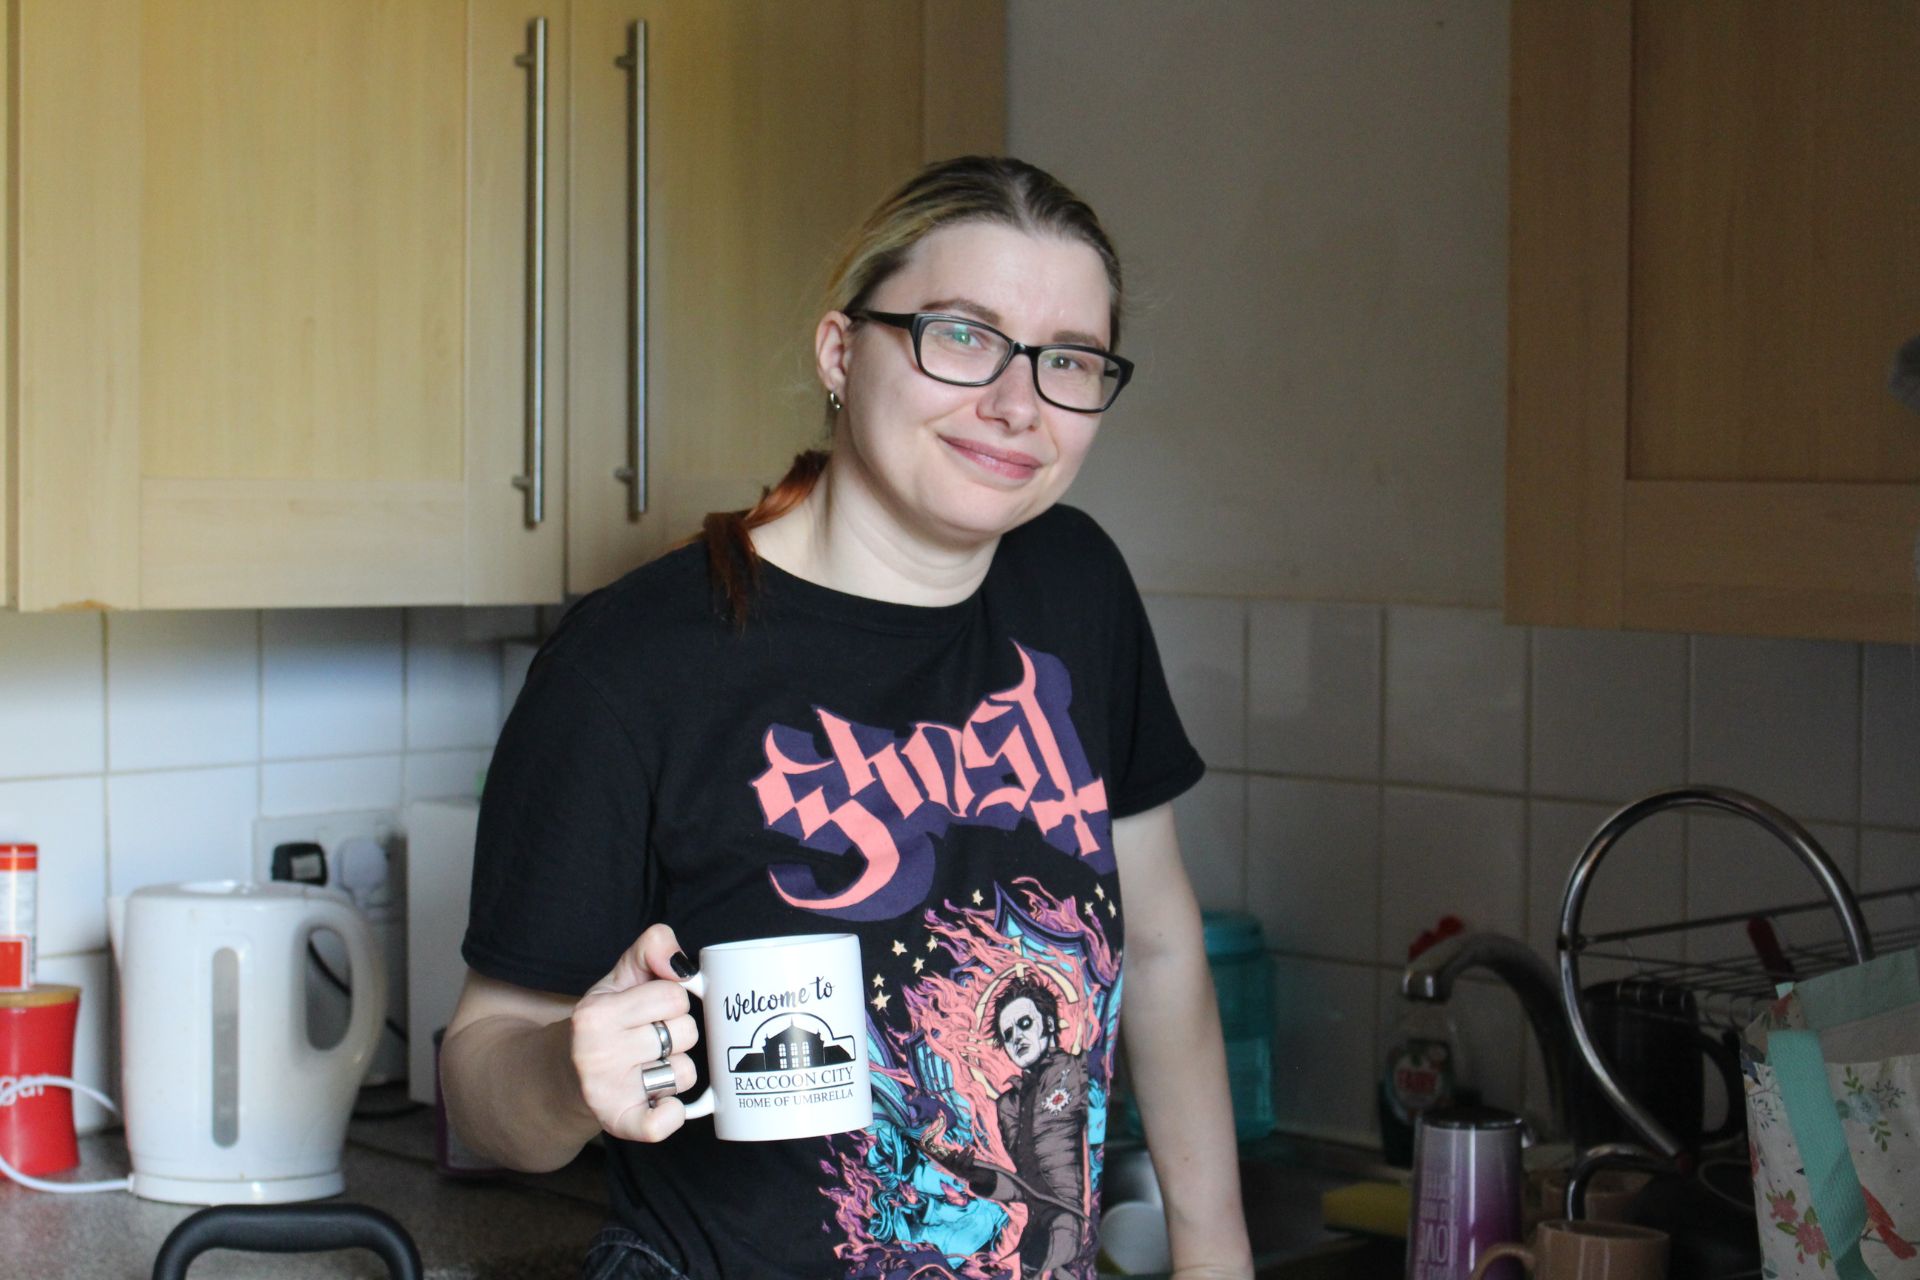 Photo of person standing and smiling in kitchen holding a mug